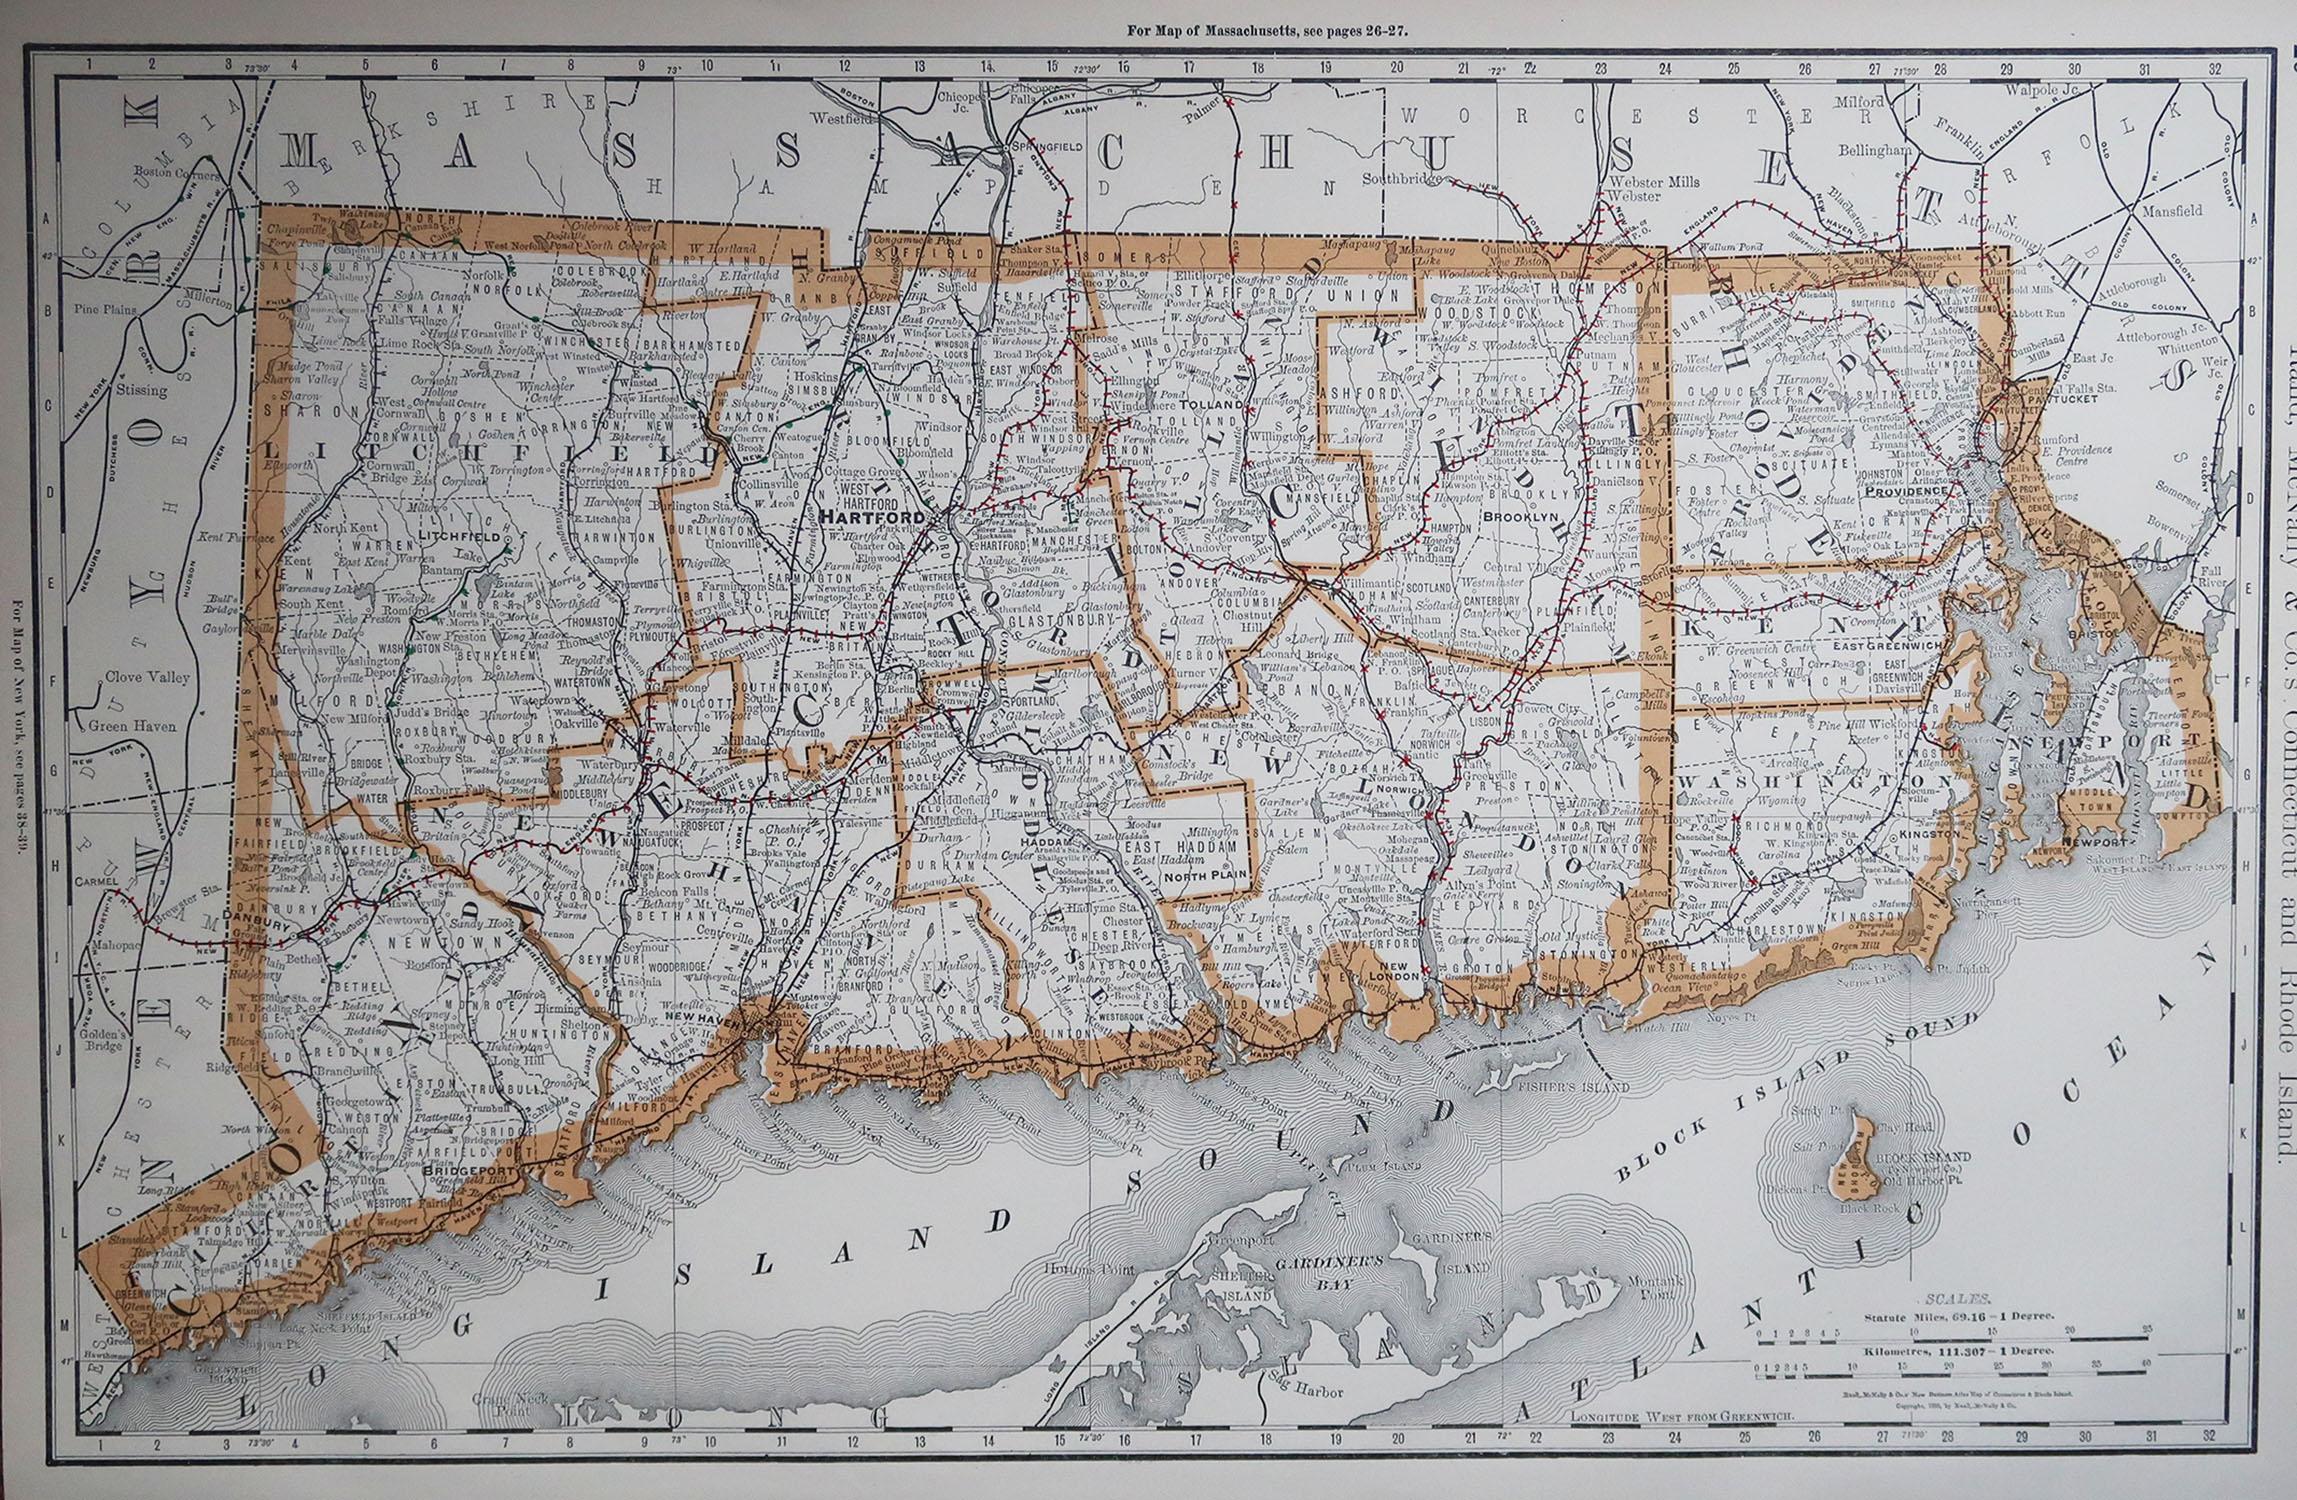 Fabulous map of Connecticut and Rhode Island

Original color

By Rand, McNally & Co.

Published, 1894

Unframed

Free shipping.